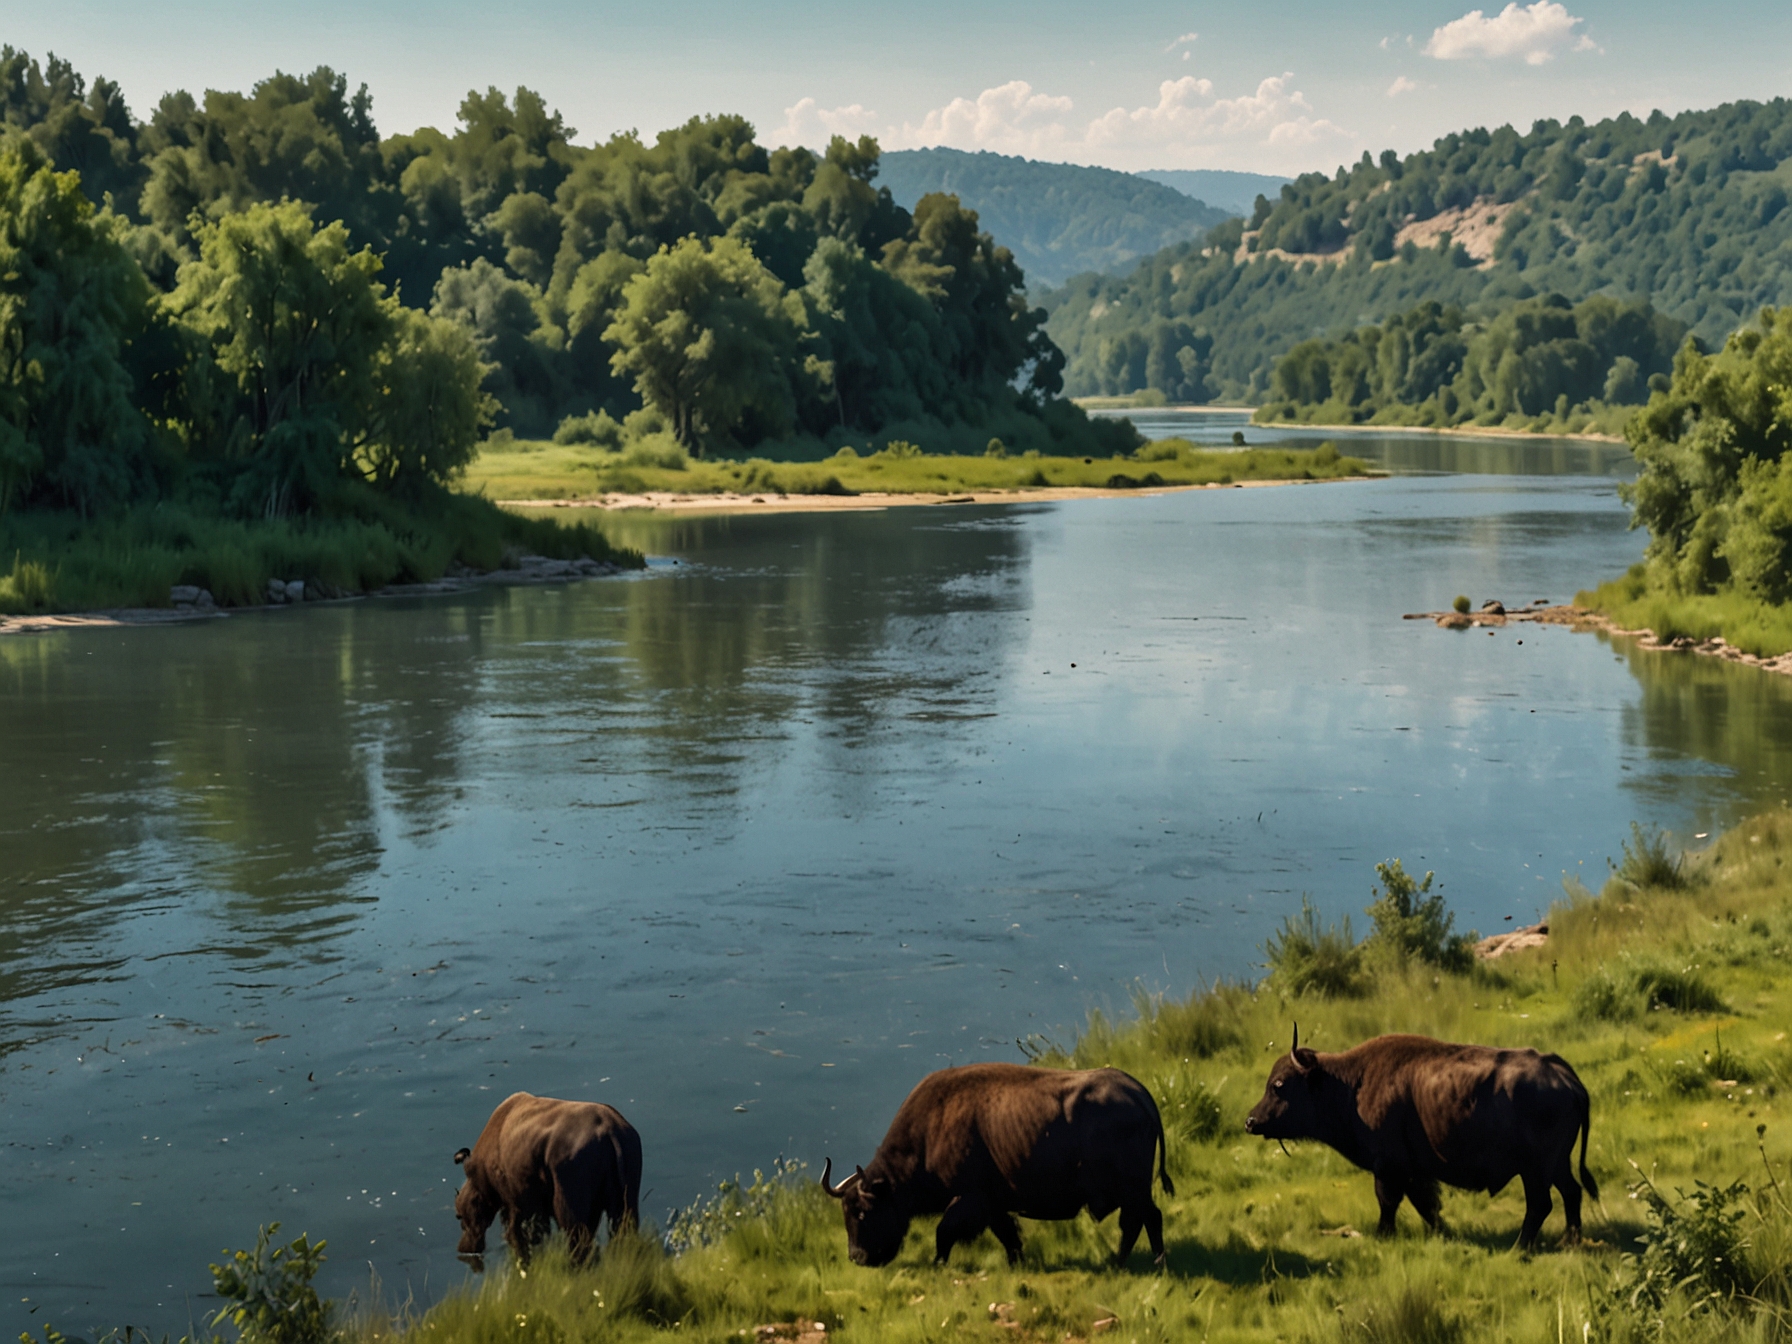 A breathtaking view of the Mura-Drava-Danube Biosphere Reserve with lush greenery, rivers winding through wetlands, and water buffaloes grazing peacefully on the riverbanks.